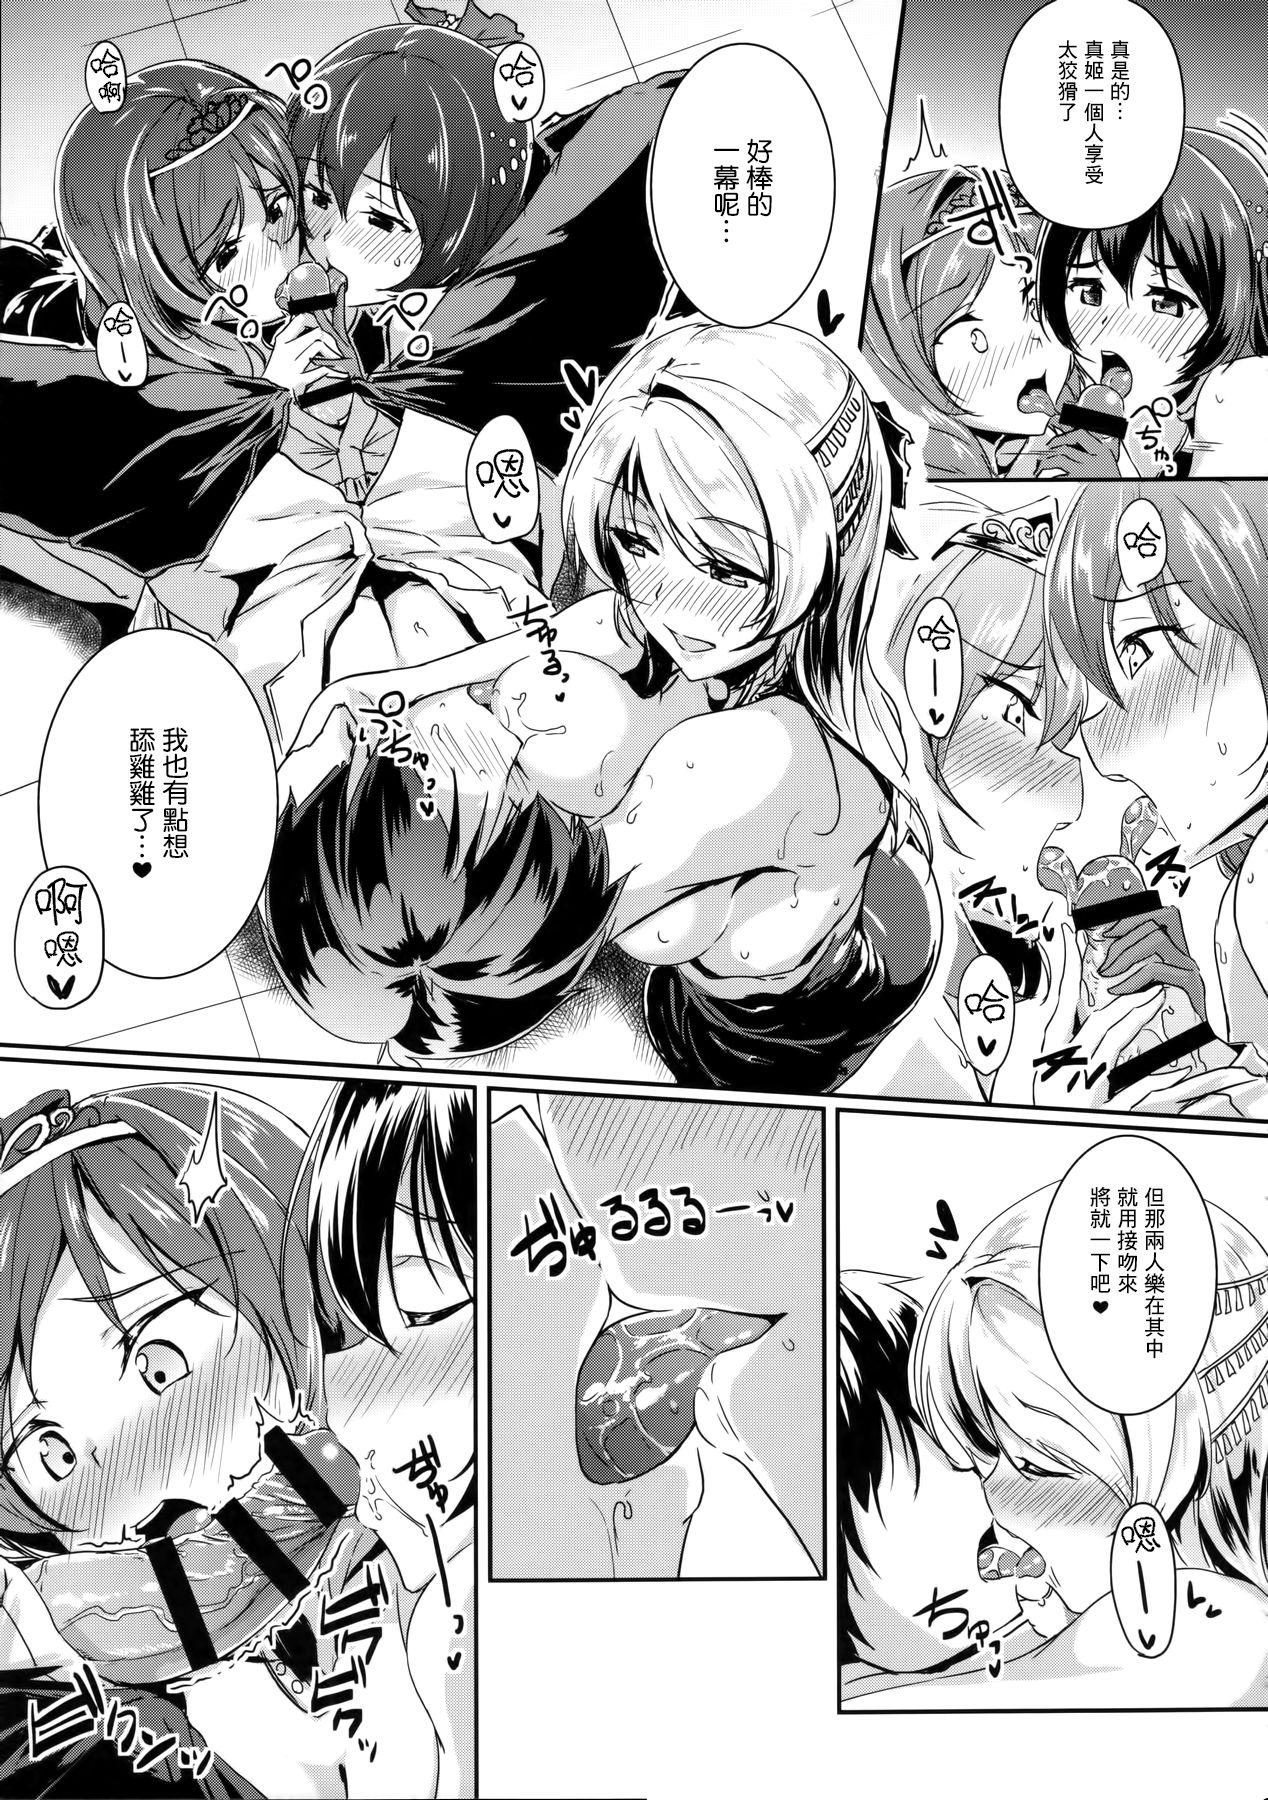 Spit secret in my heart - Love live Ameture Porn - Page 8